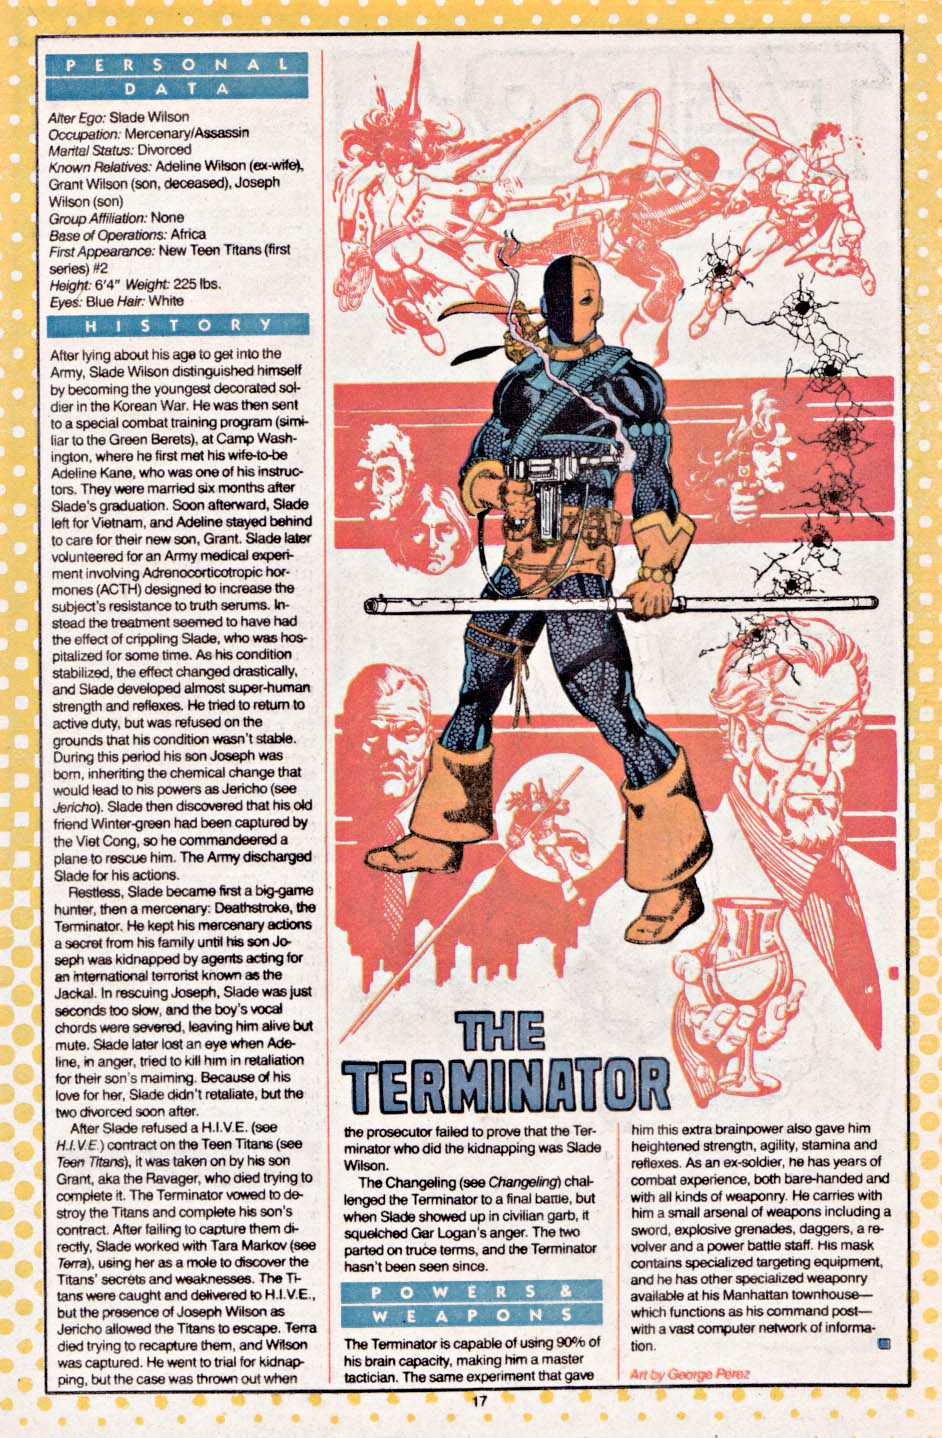 Deathstroke The Terminator by George Perez - Who's Who: The Definitive Directory of the DC Universe #23